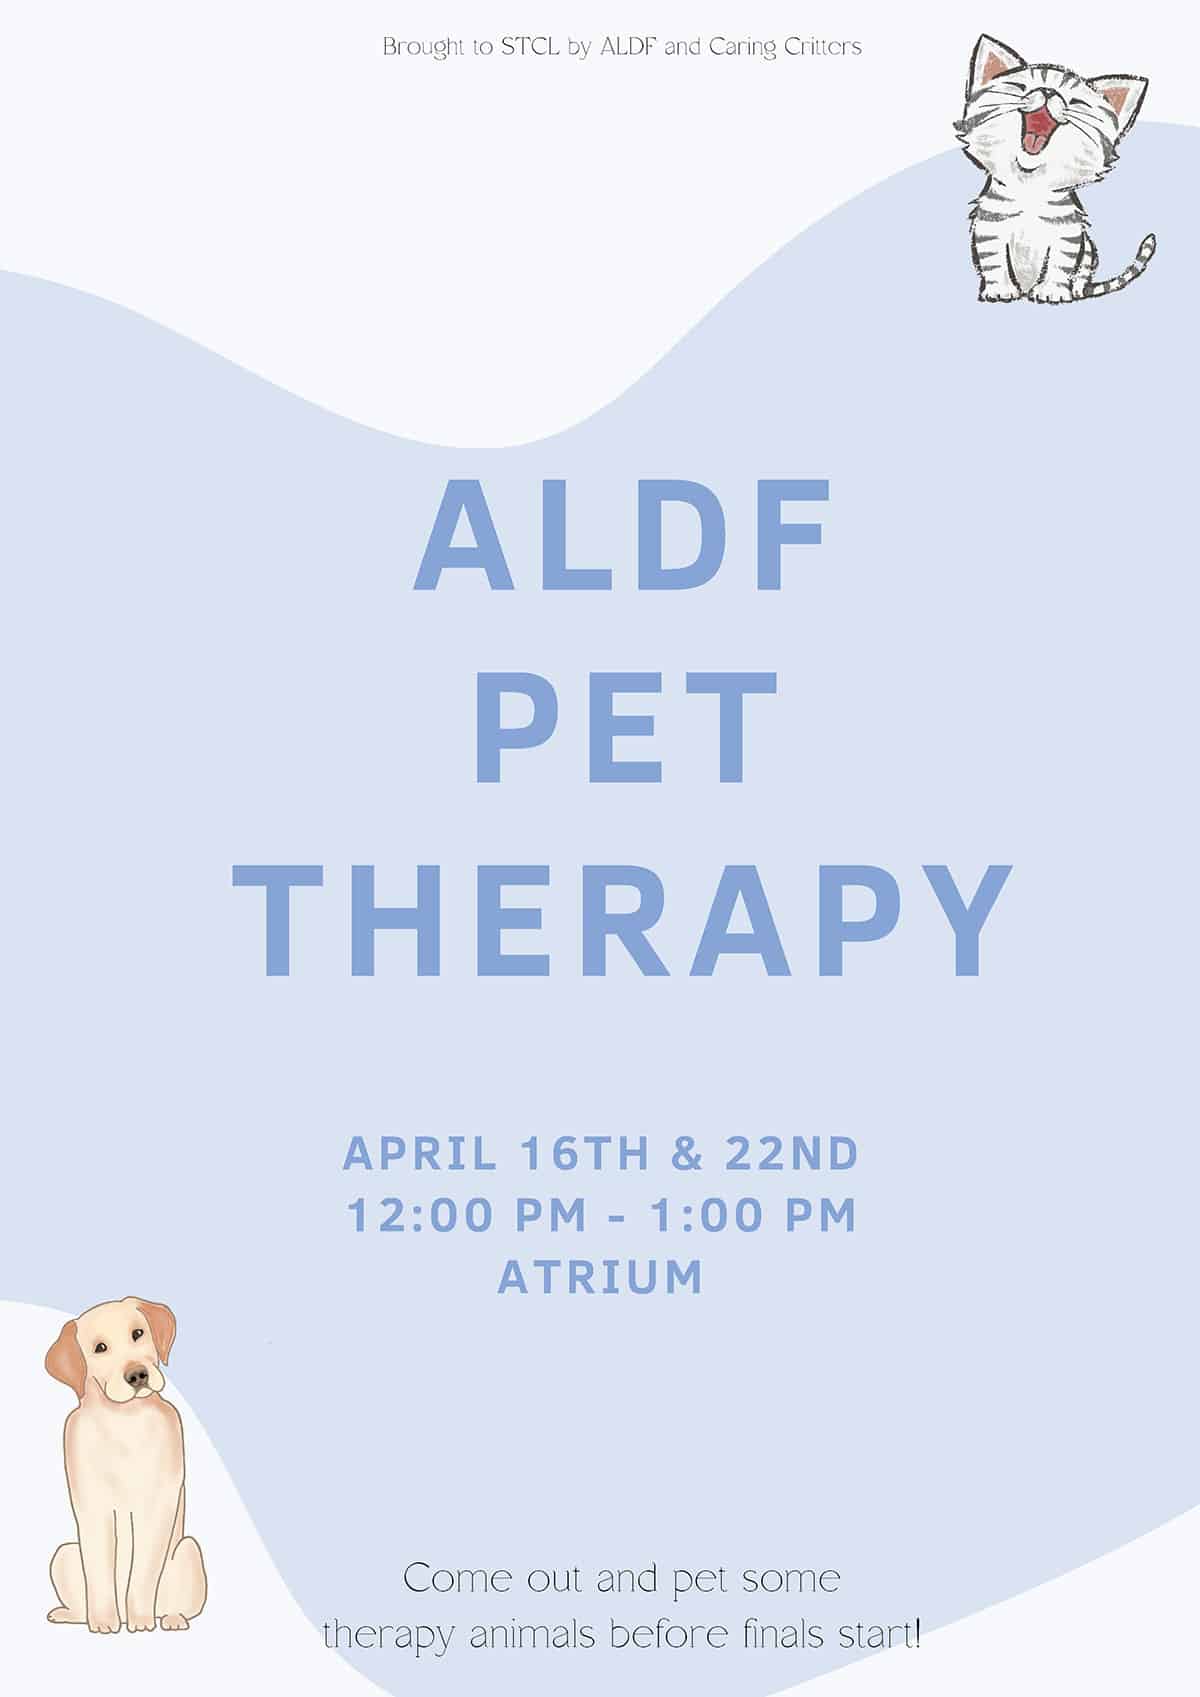 Pet Therapy Days hosted by STCL Houston's Animal Legal Defense Fund